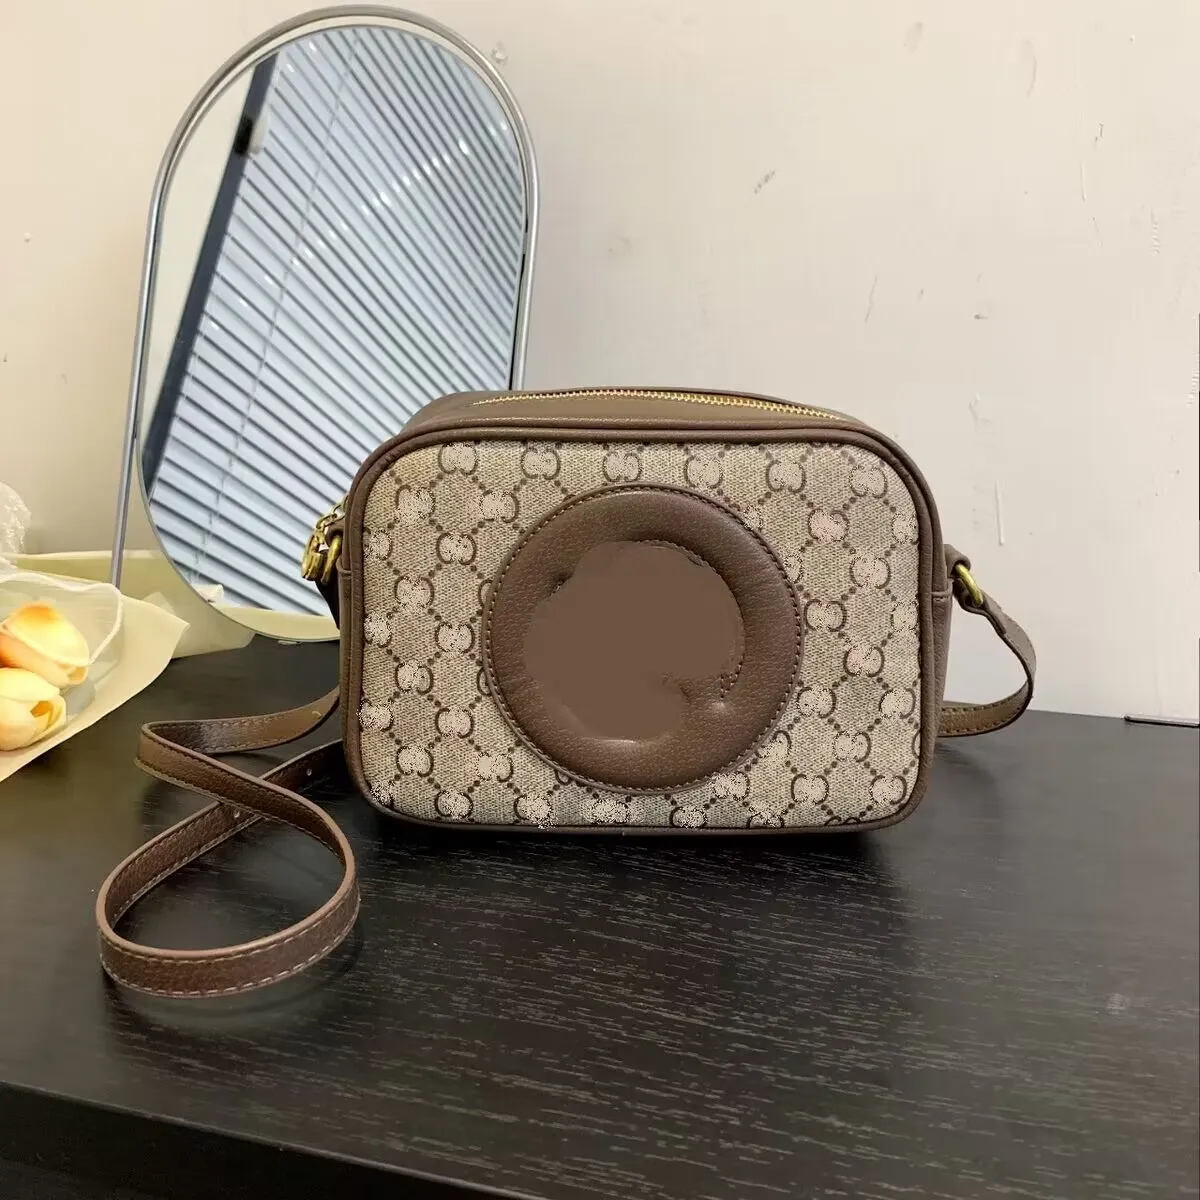 Luxury Designer Crossbody Bag With Chain Strap Top Layer Leather, Cotton Thick  Strap Shoulder Bag For Autumn And Winter From Helloz, $84.88 | DHgate.Com